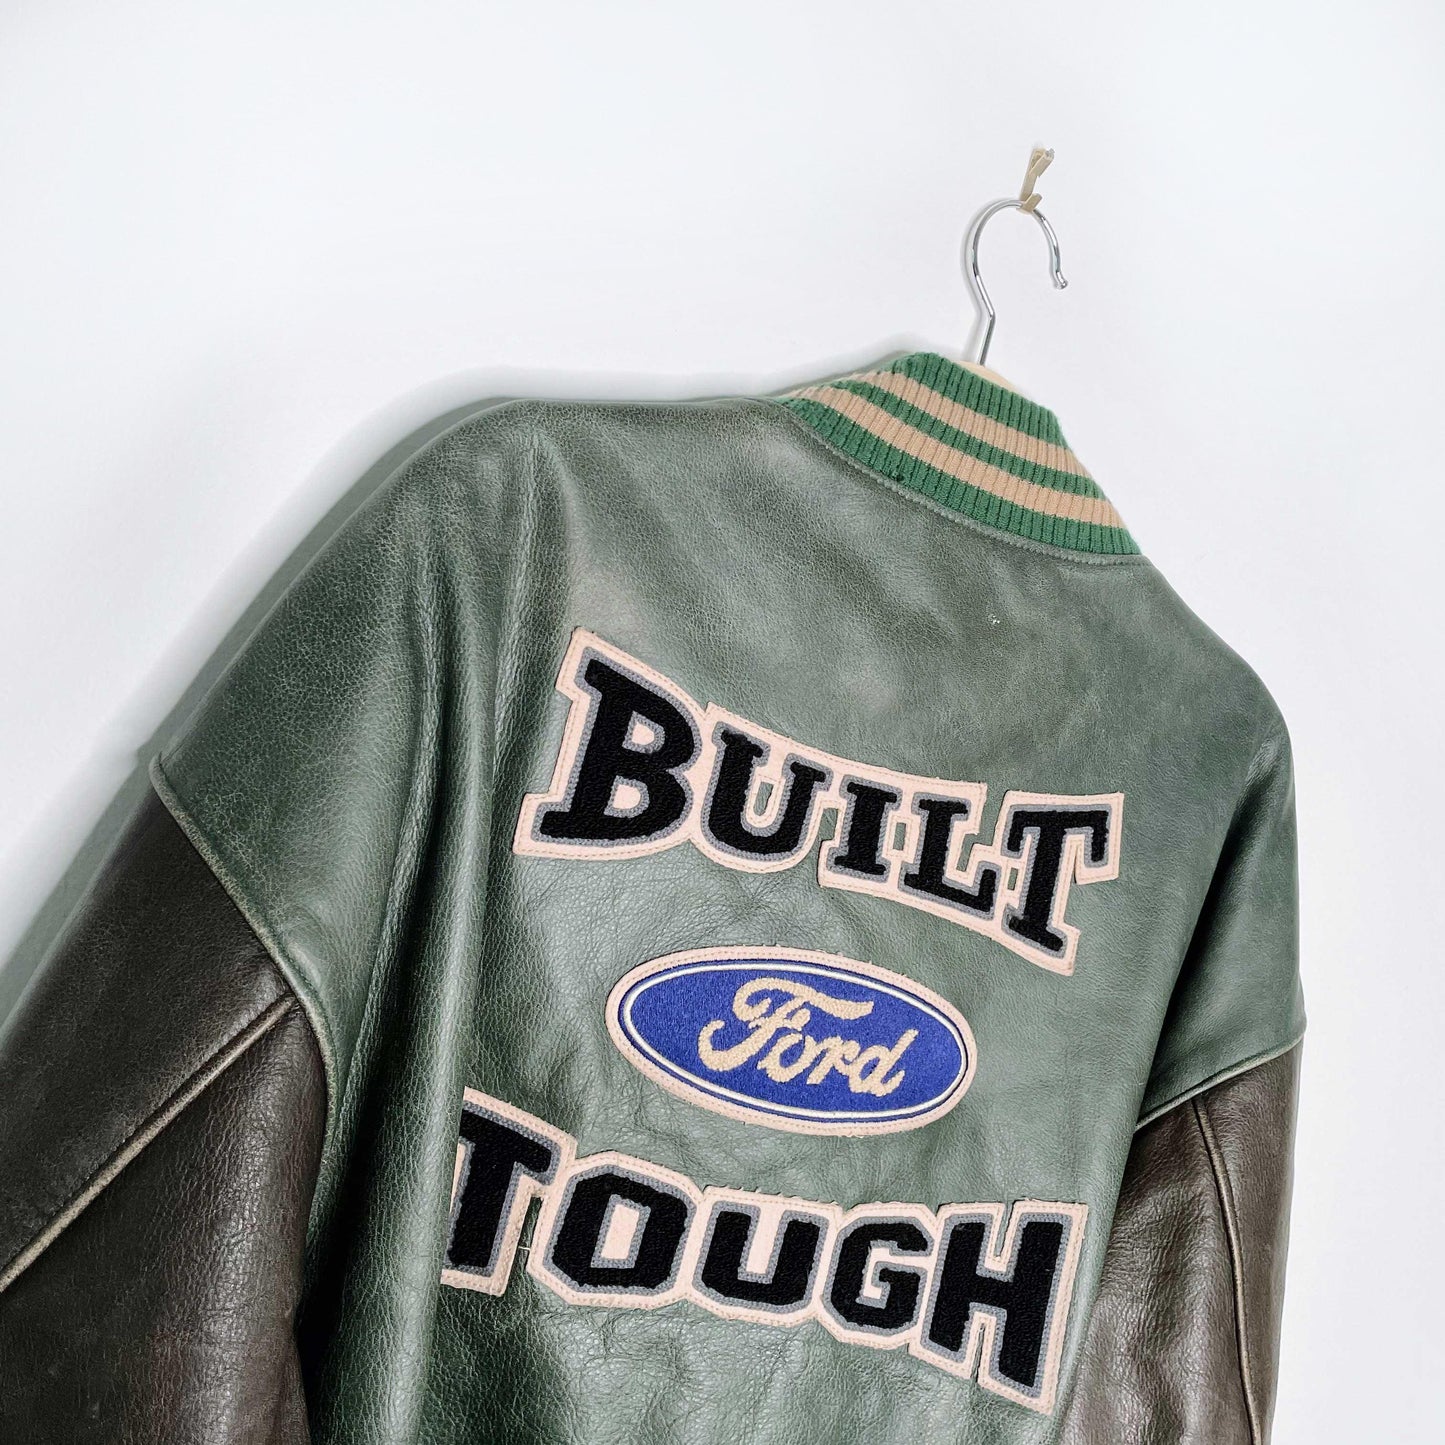 vintage roots x ford distressed leather bomber jacket